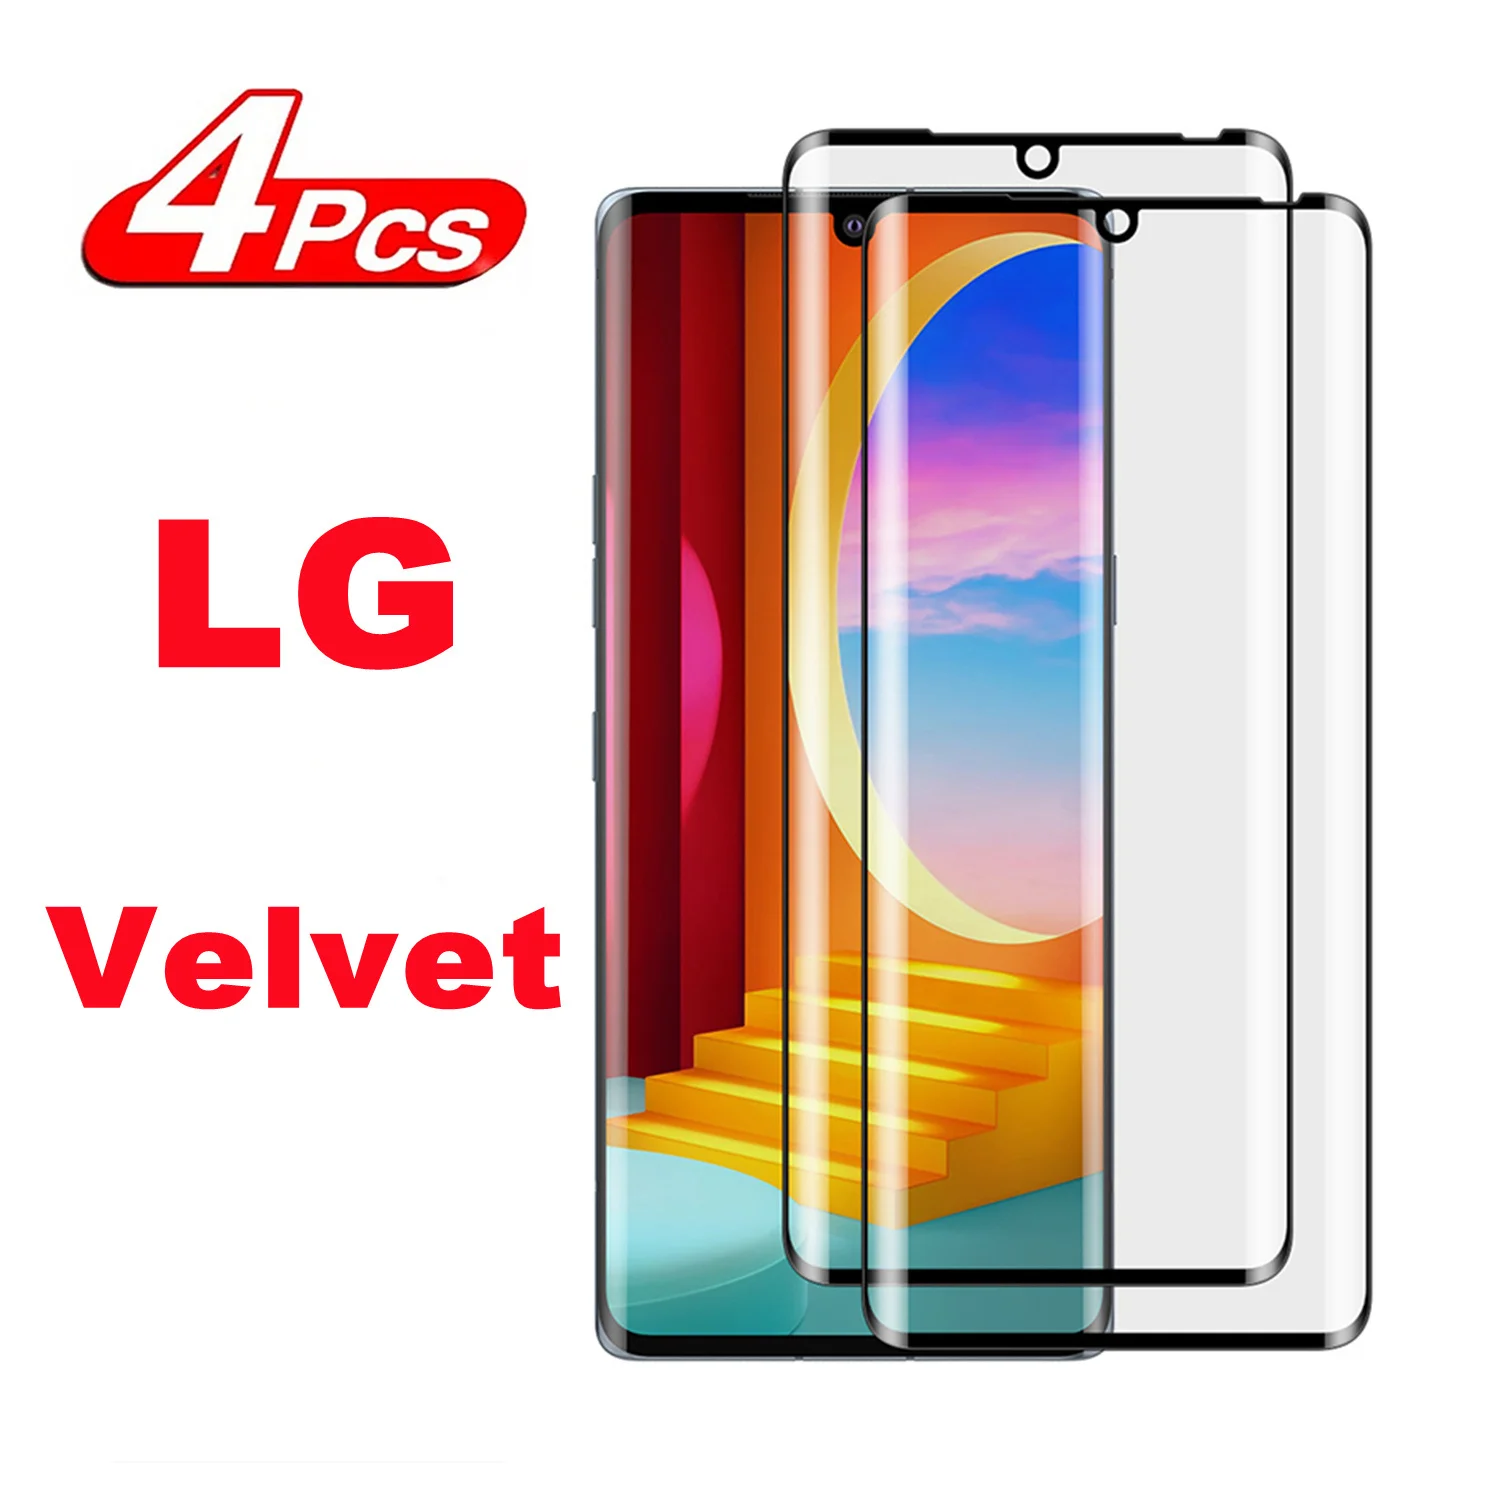 

4PCS Glass Full Cover Screen Protector Protective Film For LG Velvet / LG G9 LM-G900N LM-G900EM LG Wing 5G Curved Tempered Glass